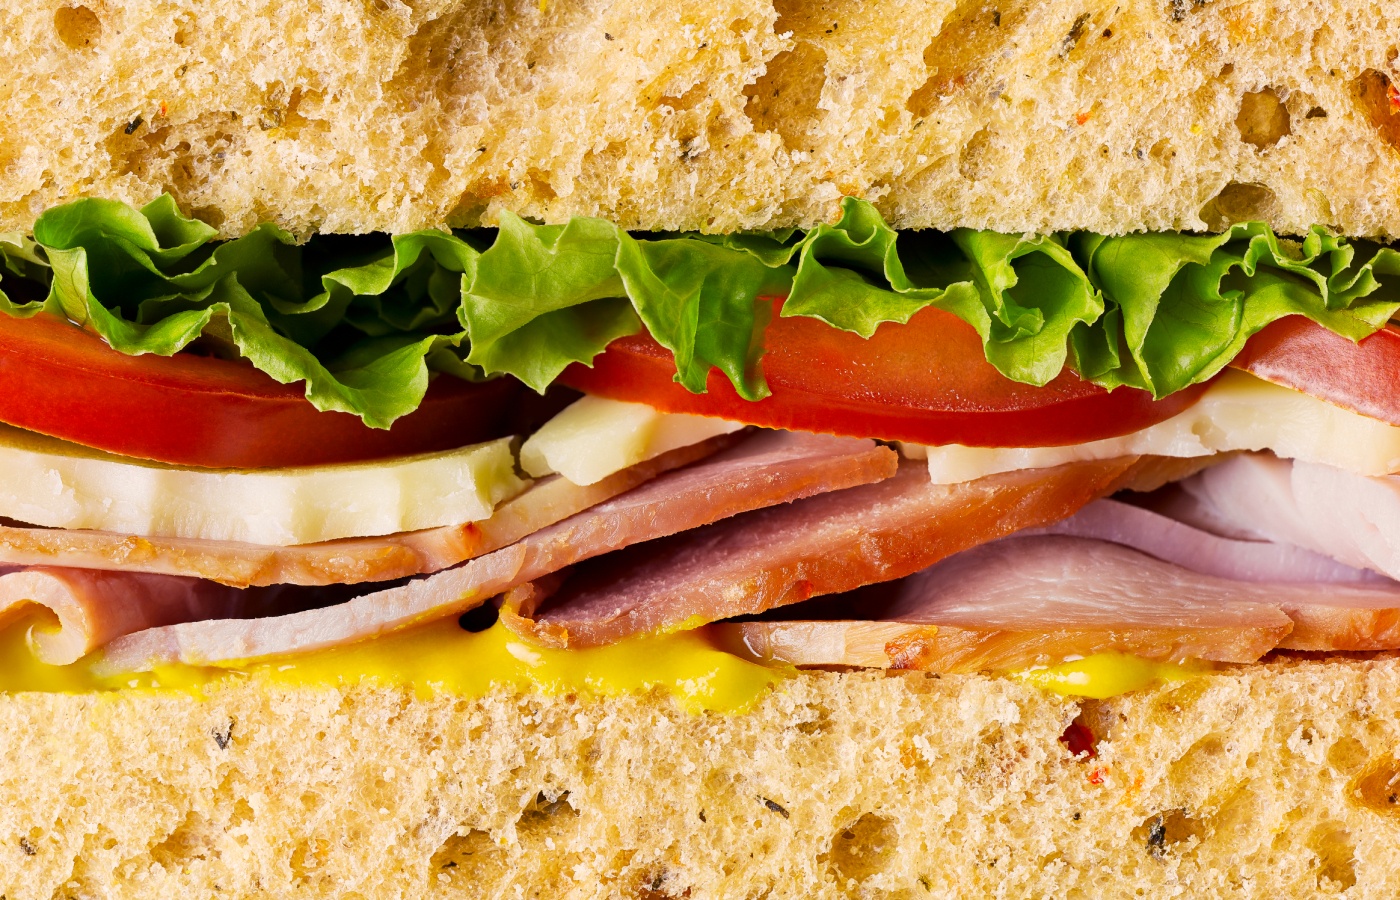 Thousands of sandwiches were recalled last week due to a possible E. coli outbreak.